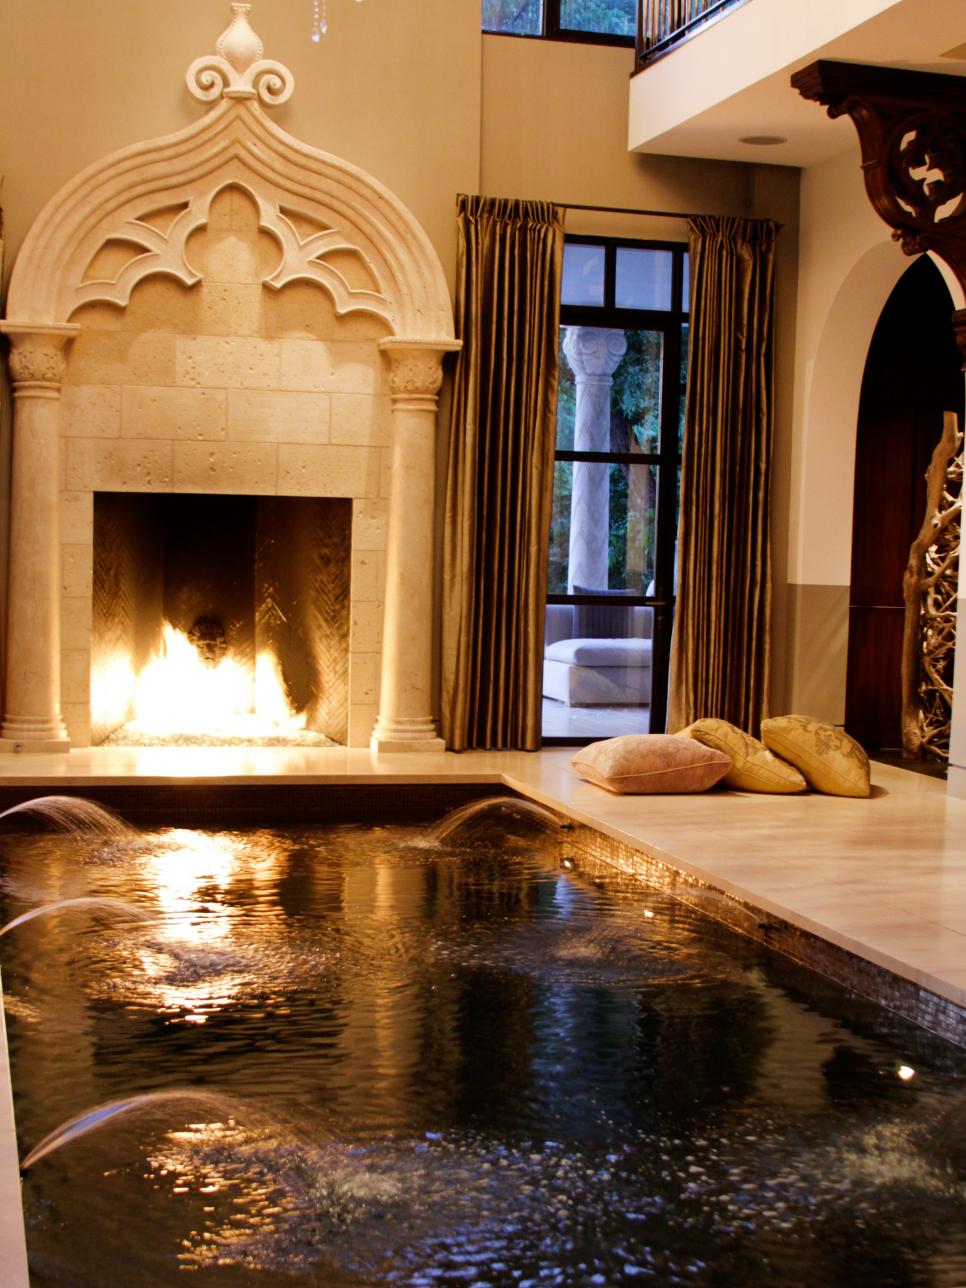 Indoor Spa With Ornate Fireplace | HGTV